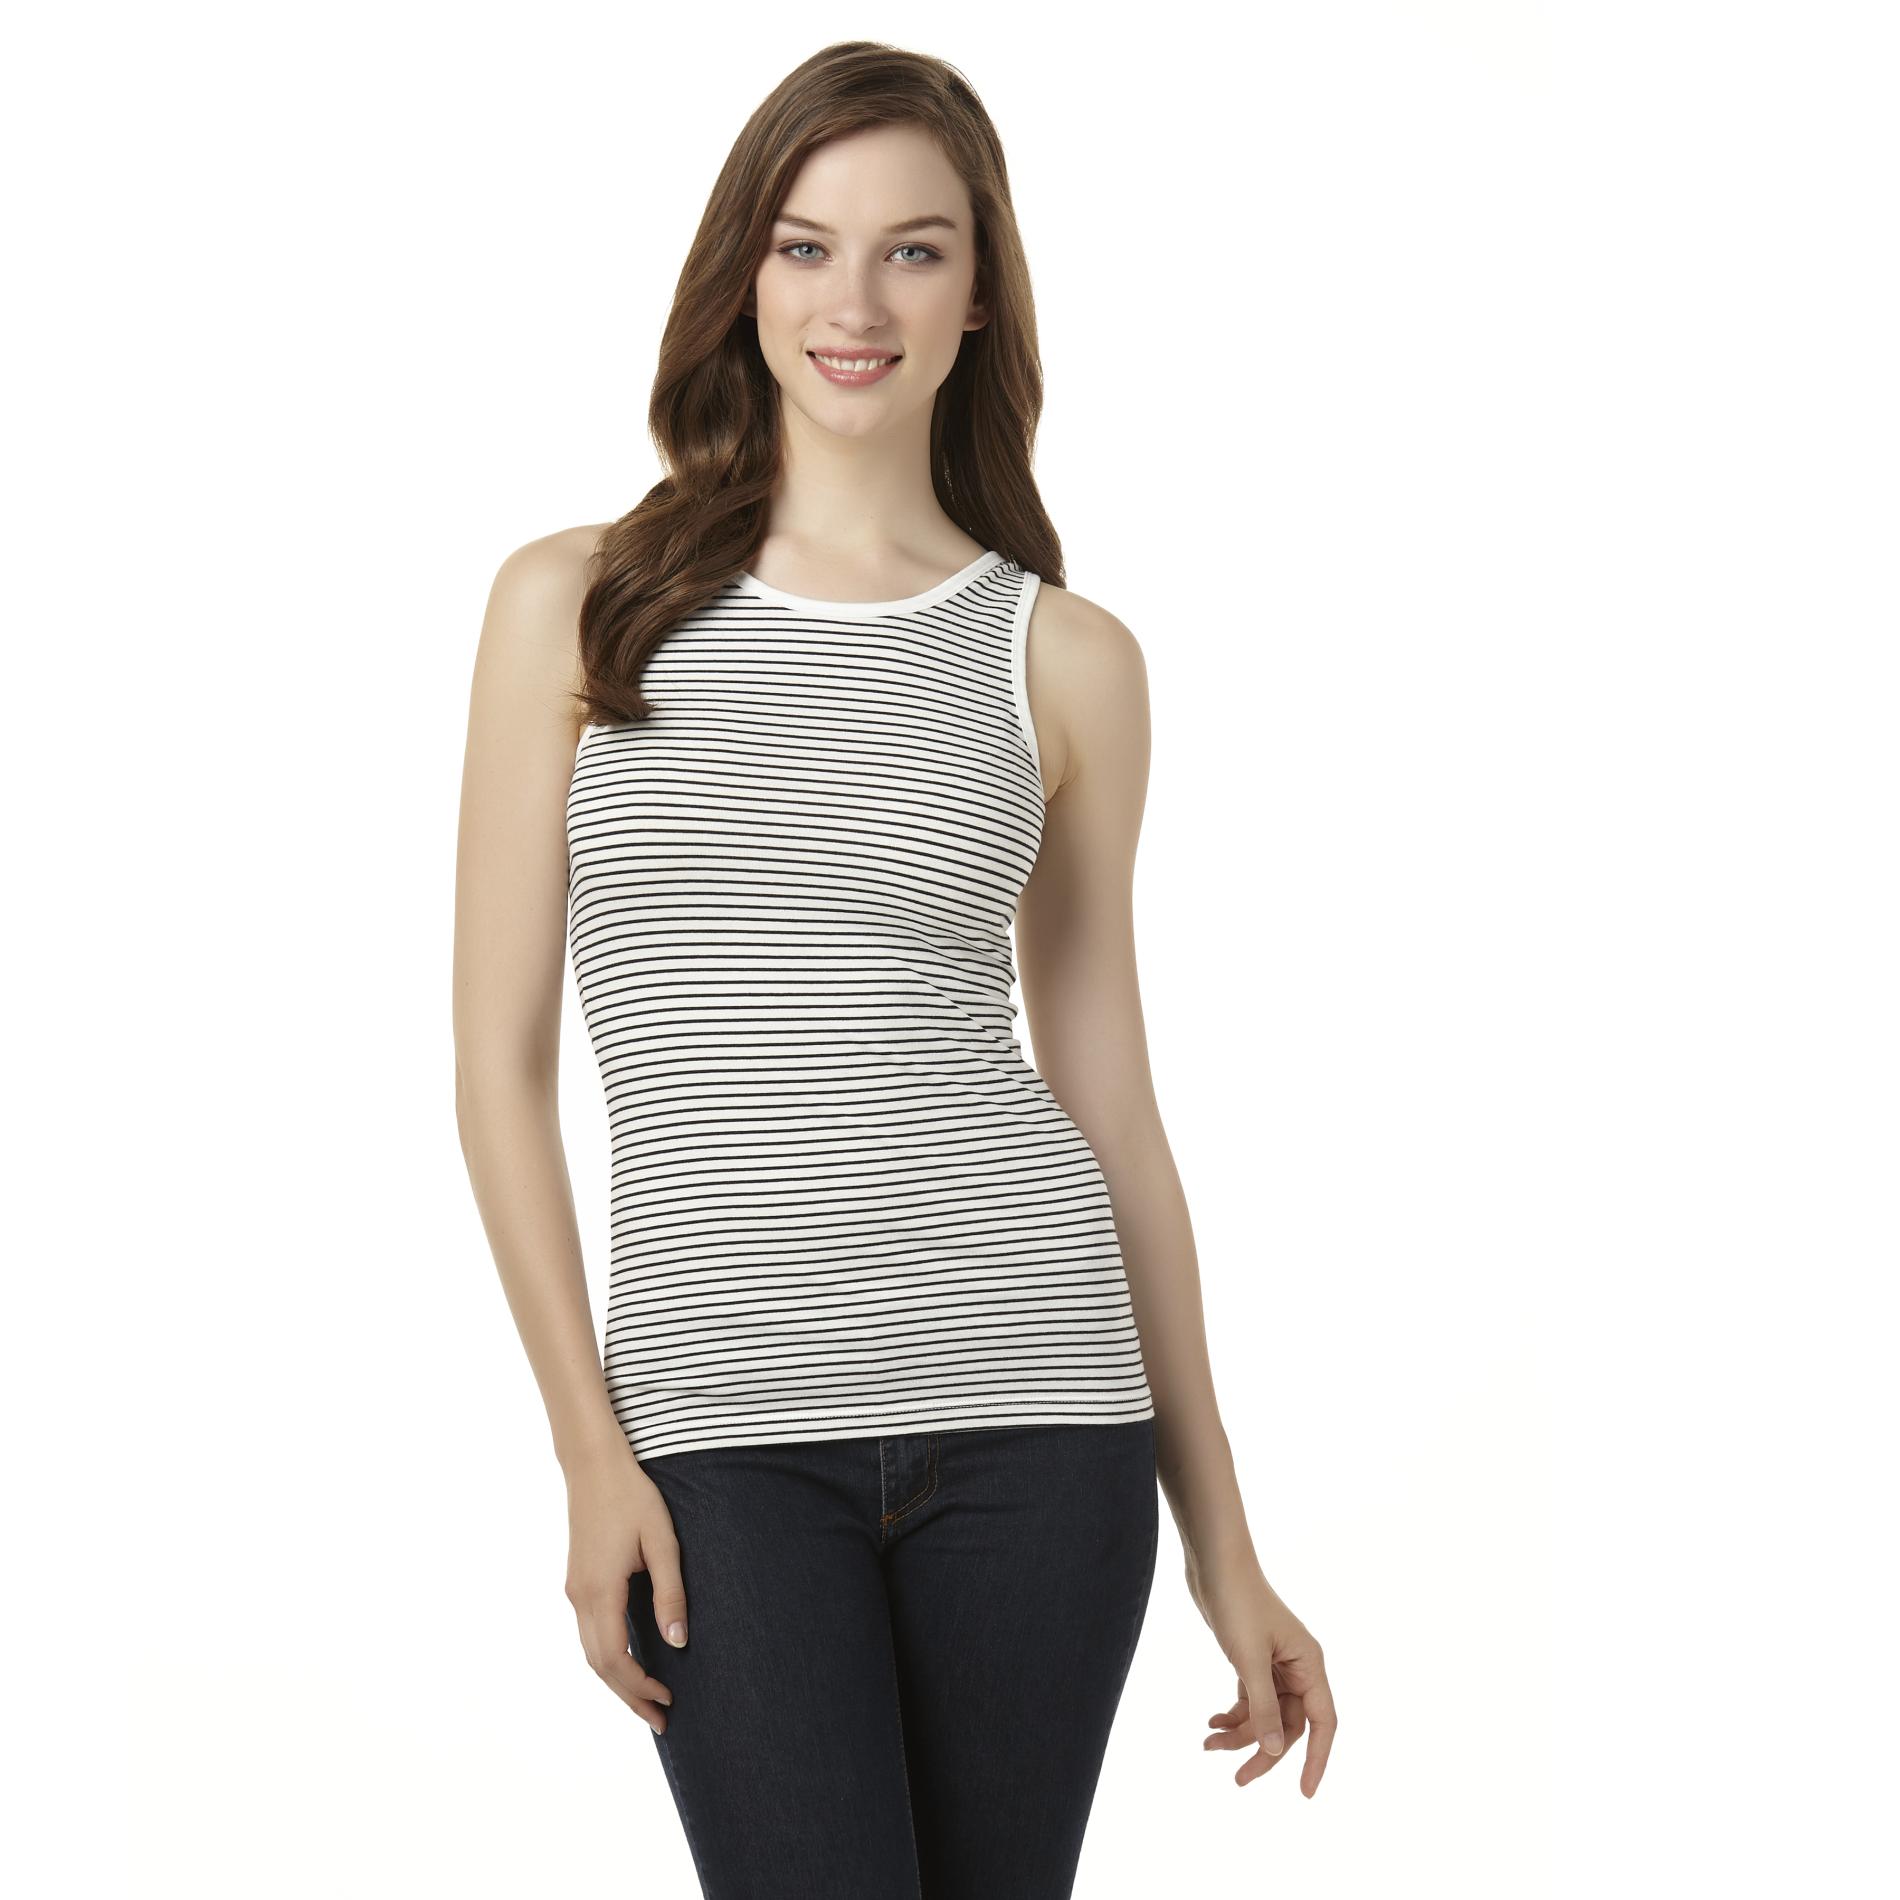 Simply Styled Women's Maggie Tank Top - Striped